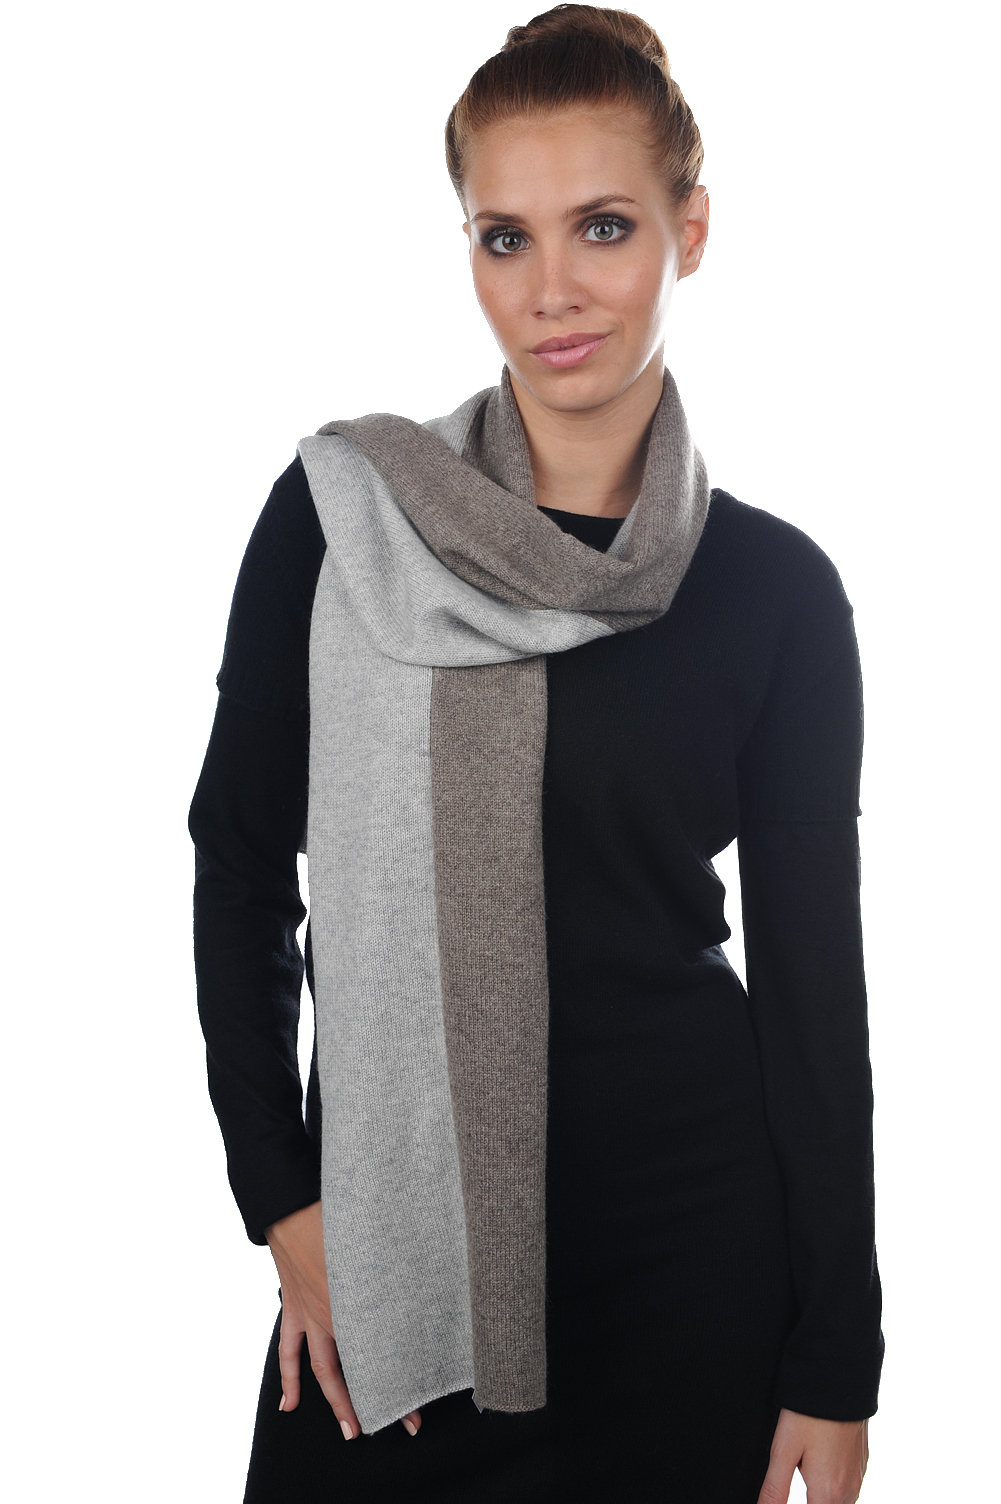 Cashmere & Yak accessories scarves mufflers luvo flanelle chine natural grey 164 x 26 cm